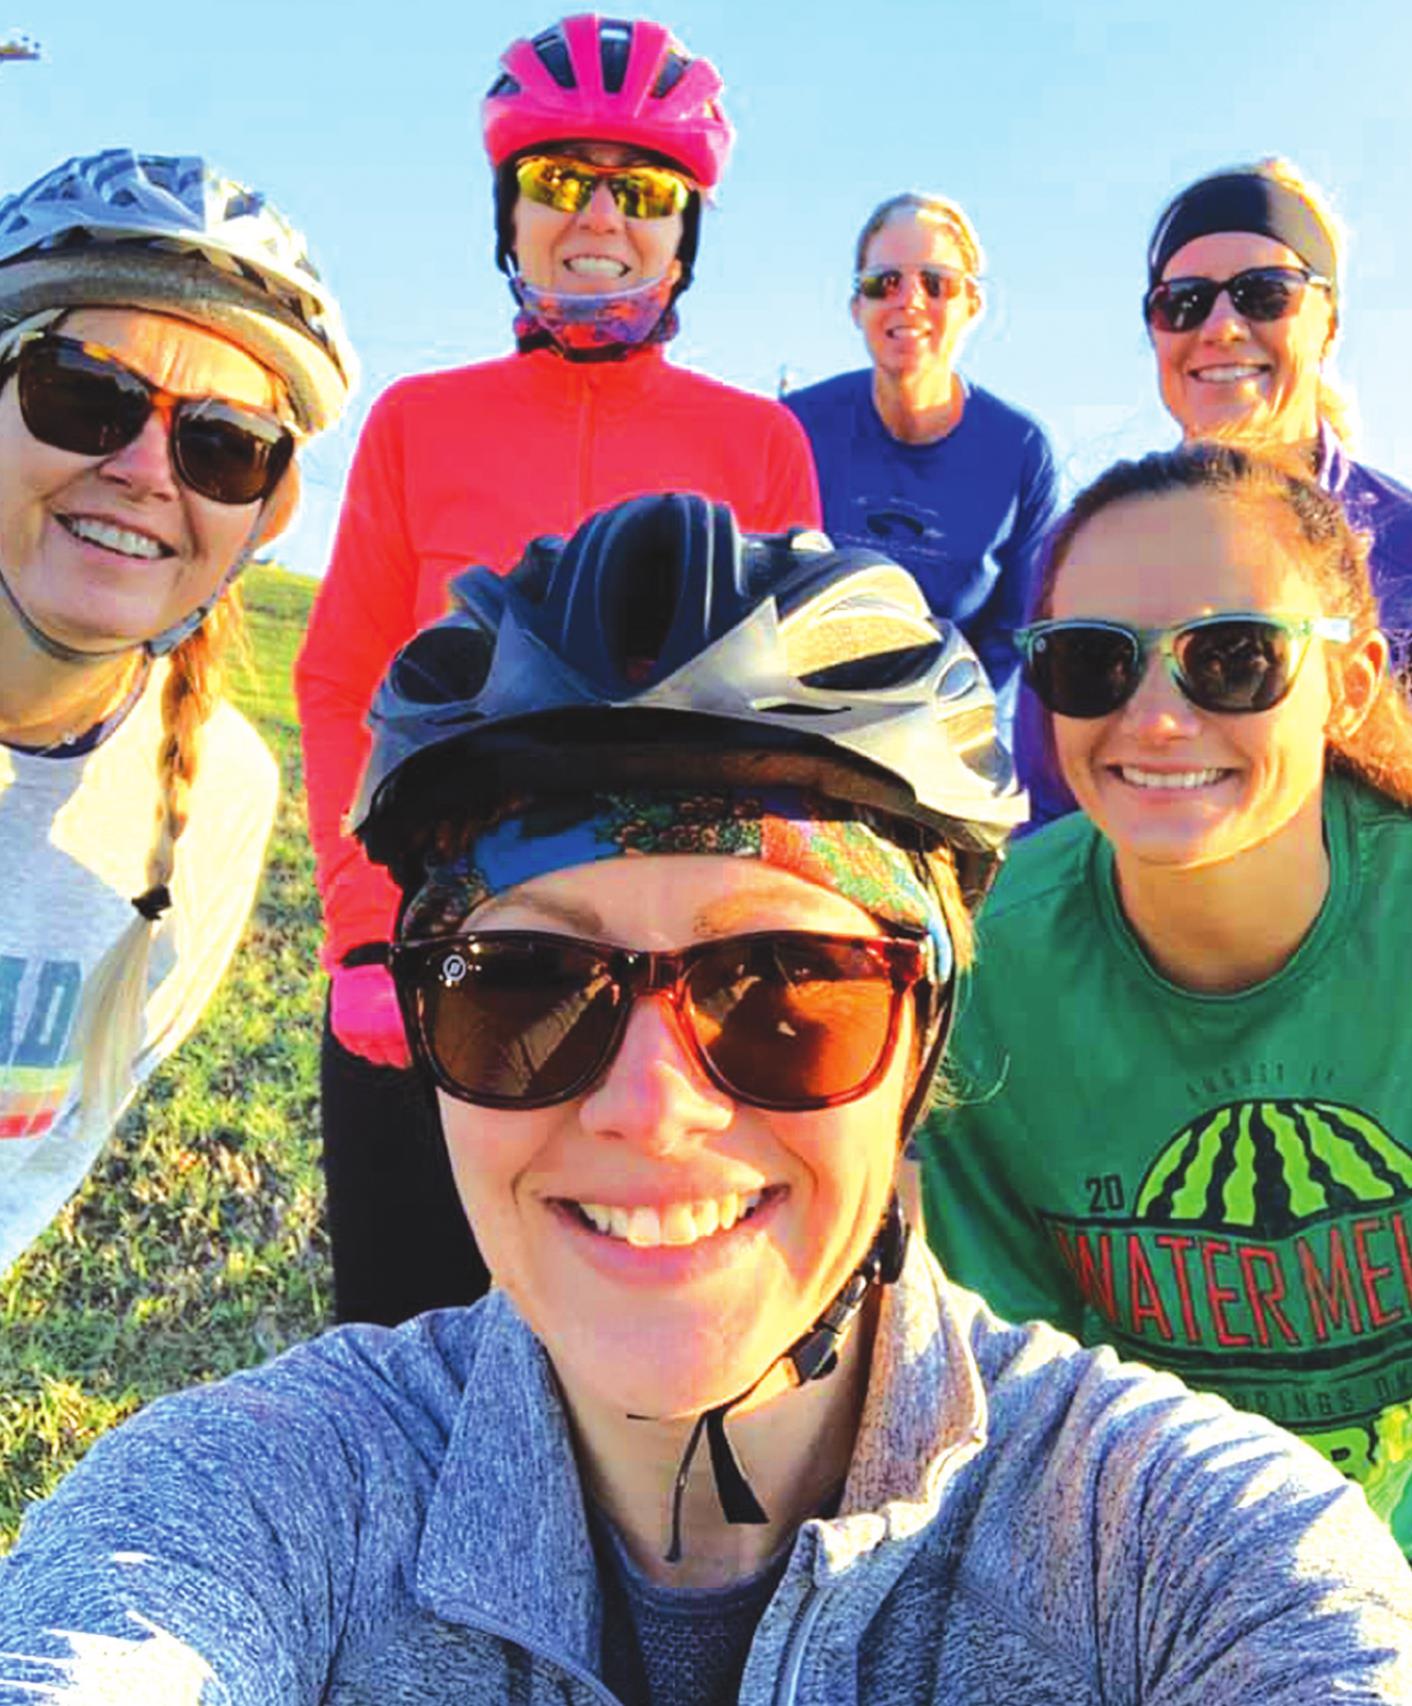 Pictured at left, in no particular order, is Paige Craighead, Mindy King, Melissa Johnson, Senea Young, Jennifer Johnson and Kim Blanton. All six either biked or ran a special route to show support for their fellow runner and nurse who is caring for hospice patients in Binger. Provided